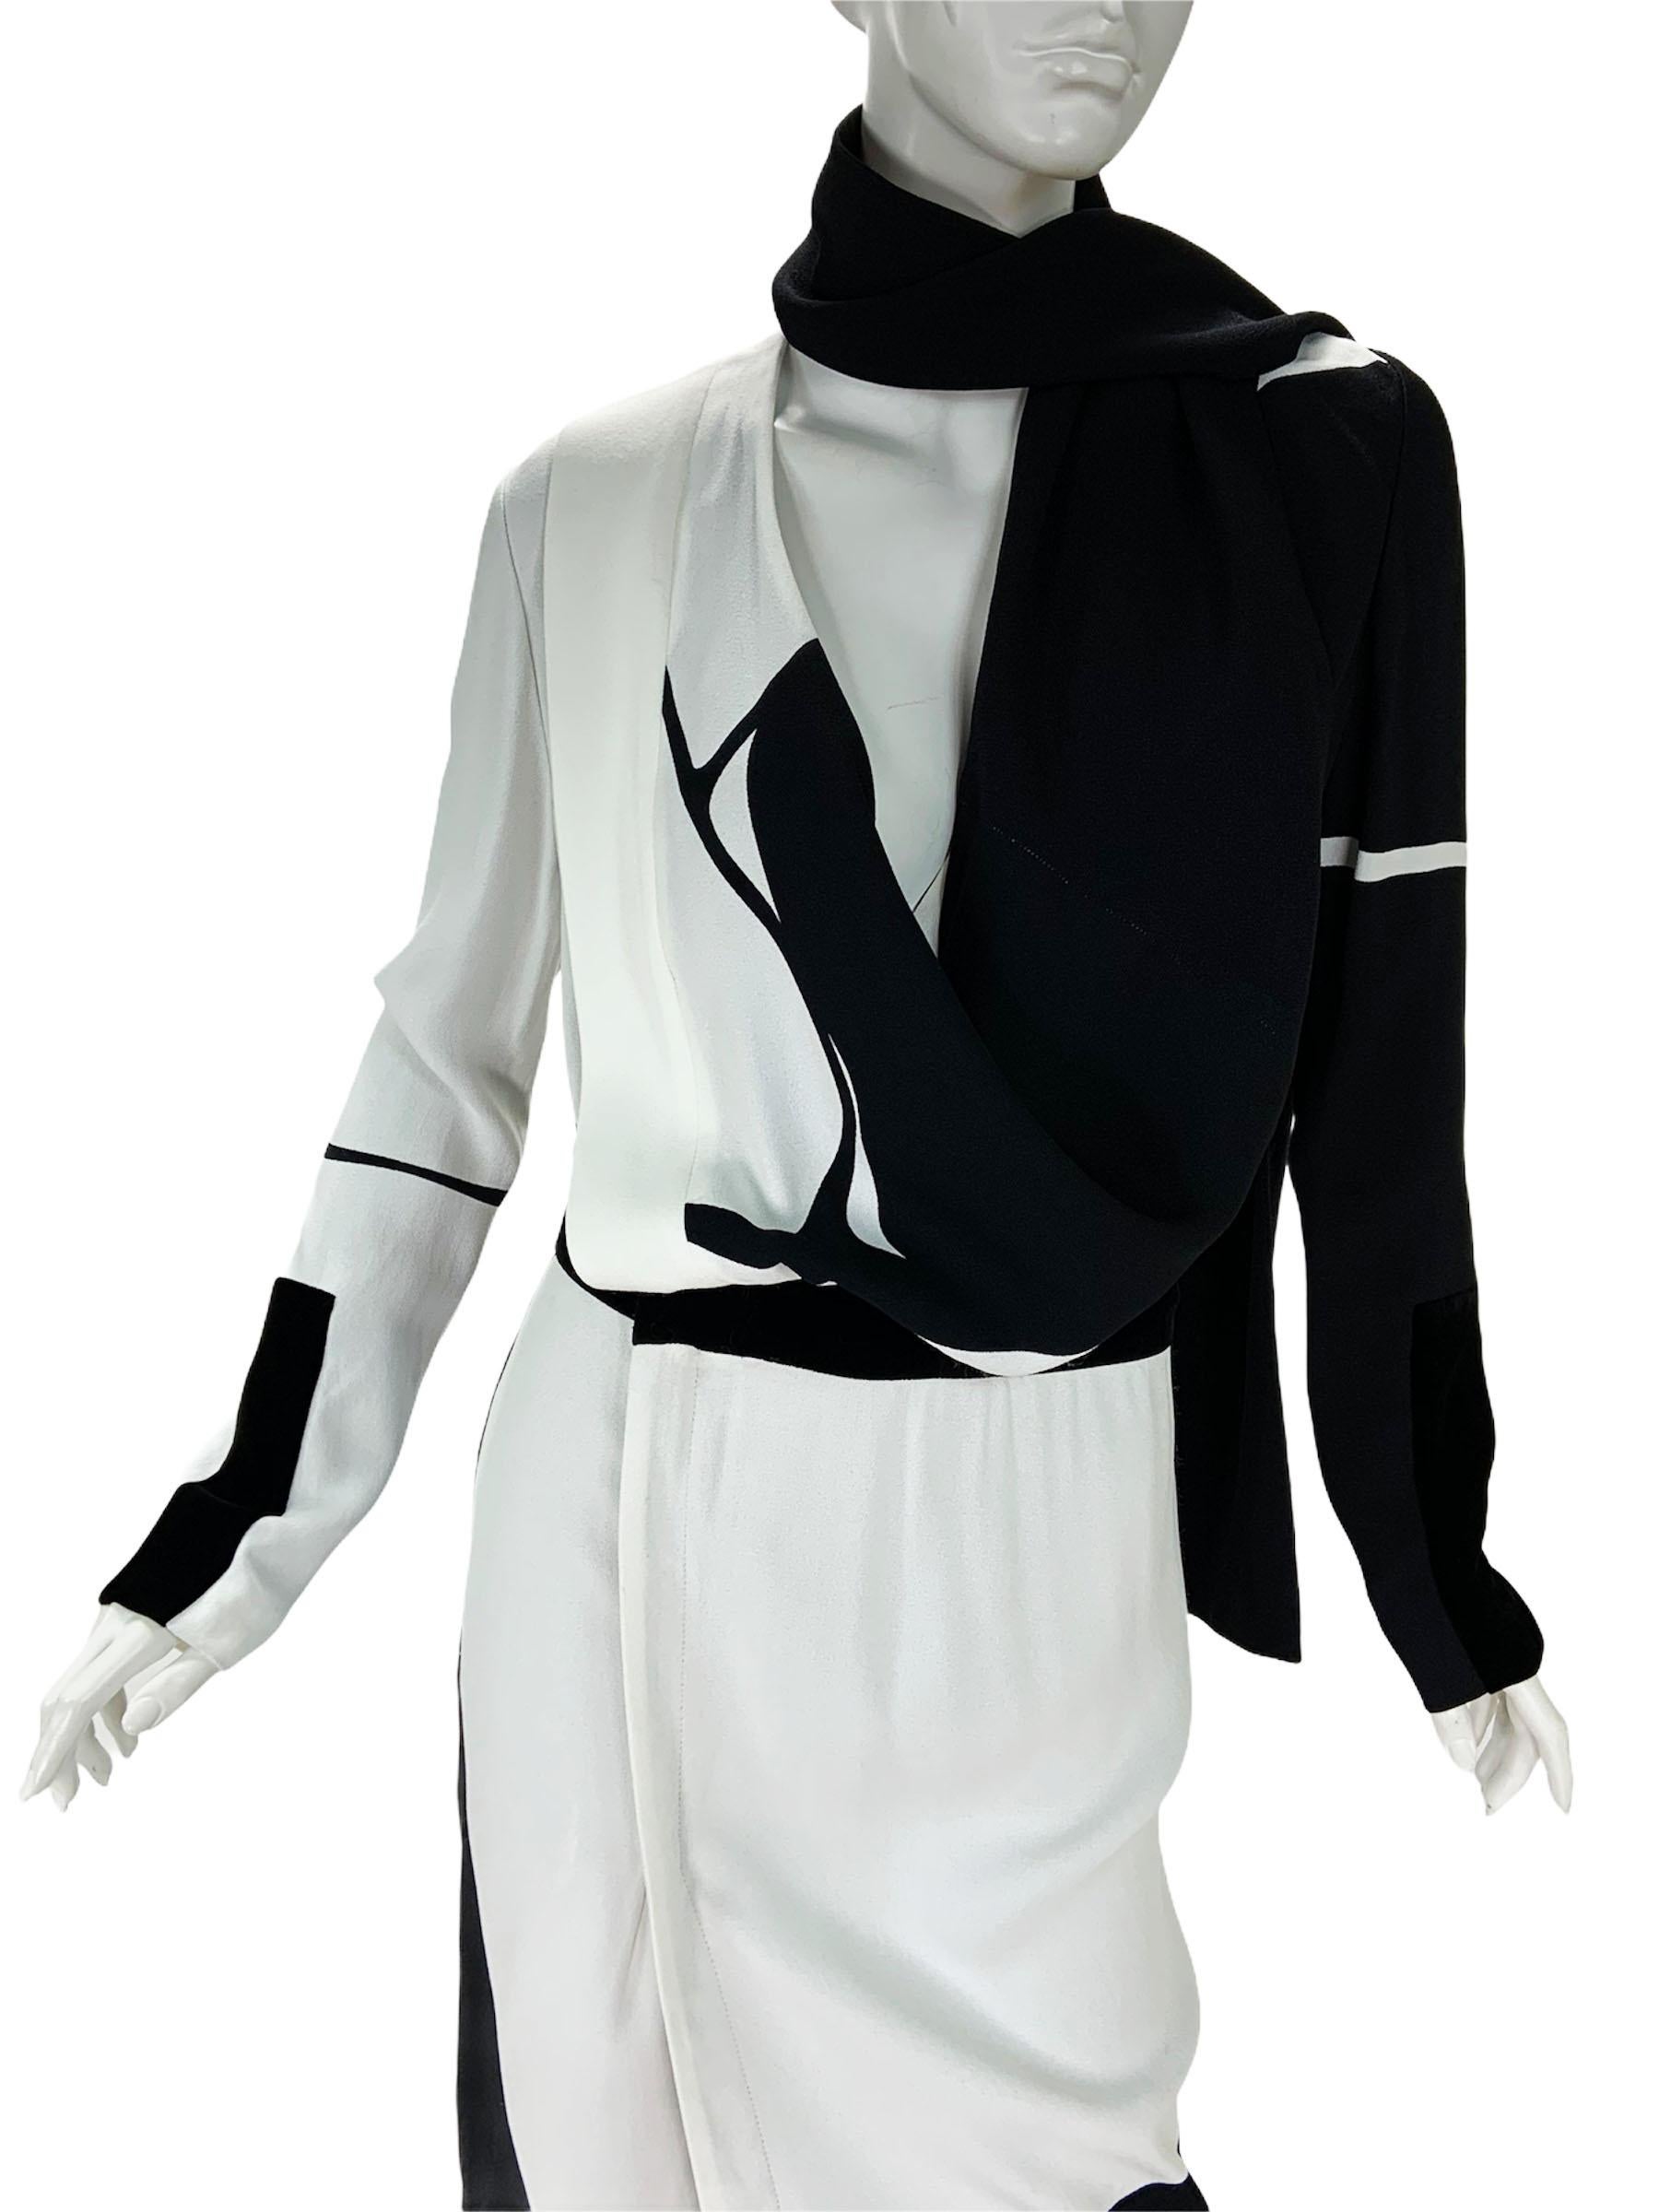 New Tom Ford S/S 2017 Collection White Black Color-Block Cocktail Dress 38 & 40 In New Condition For Sale In Montgomery, TX